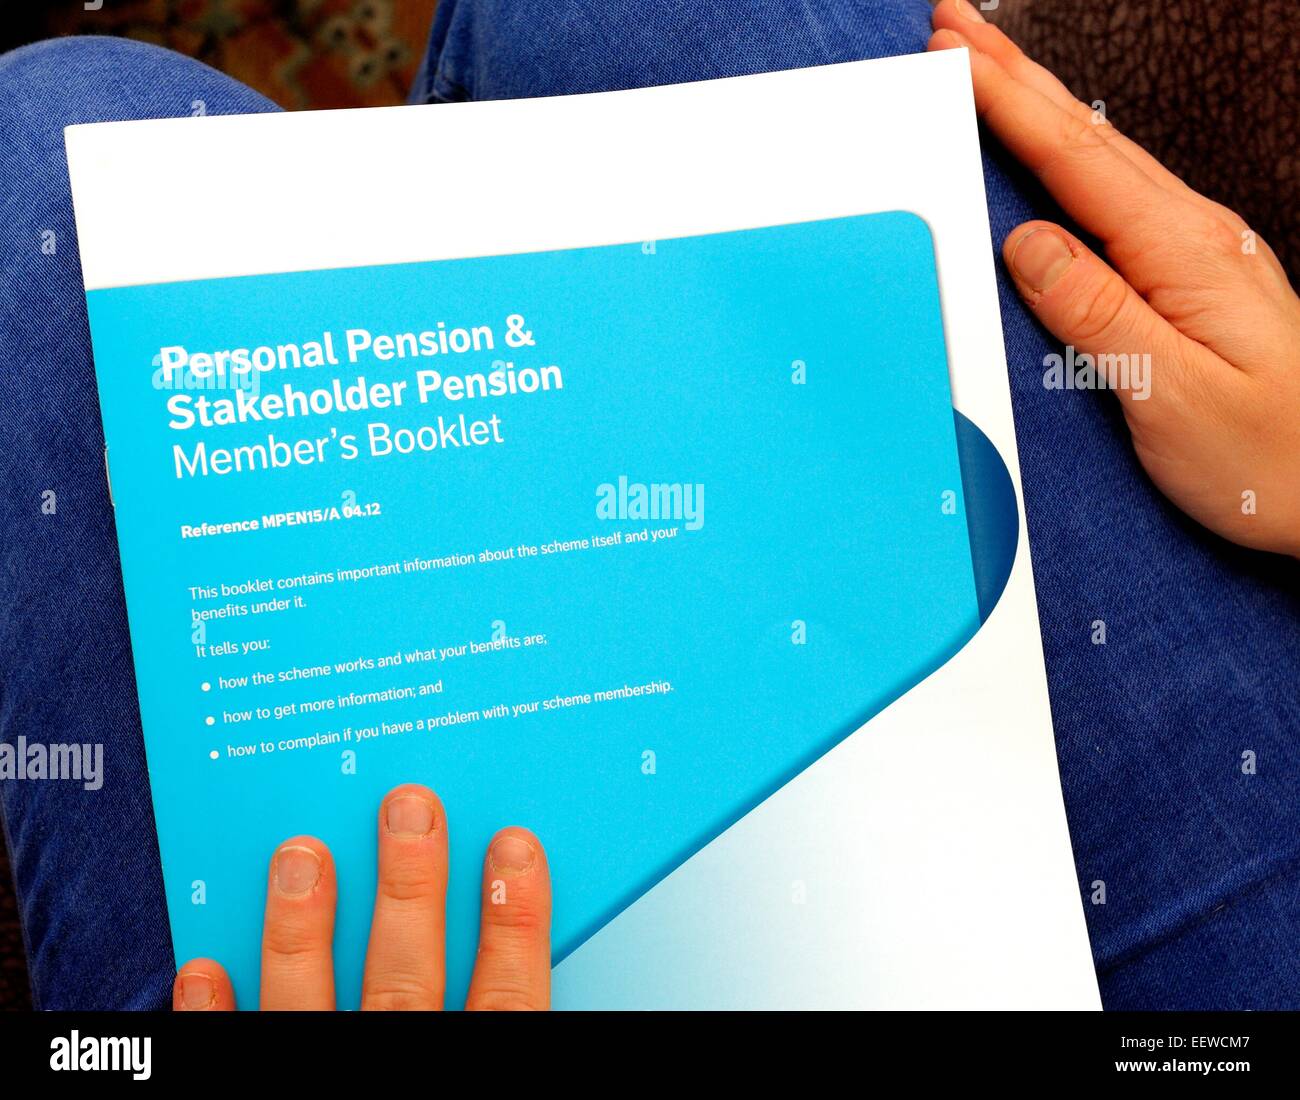 Terms and conditions of the personal pension book Stock Photo